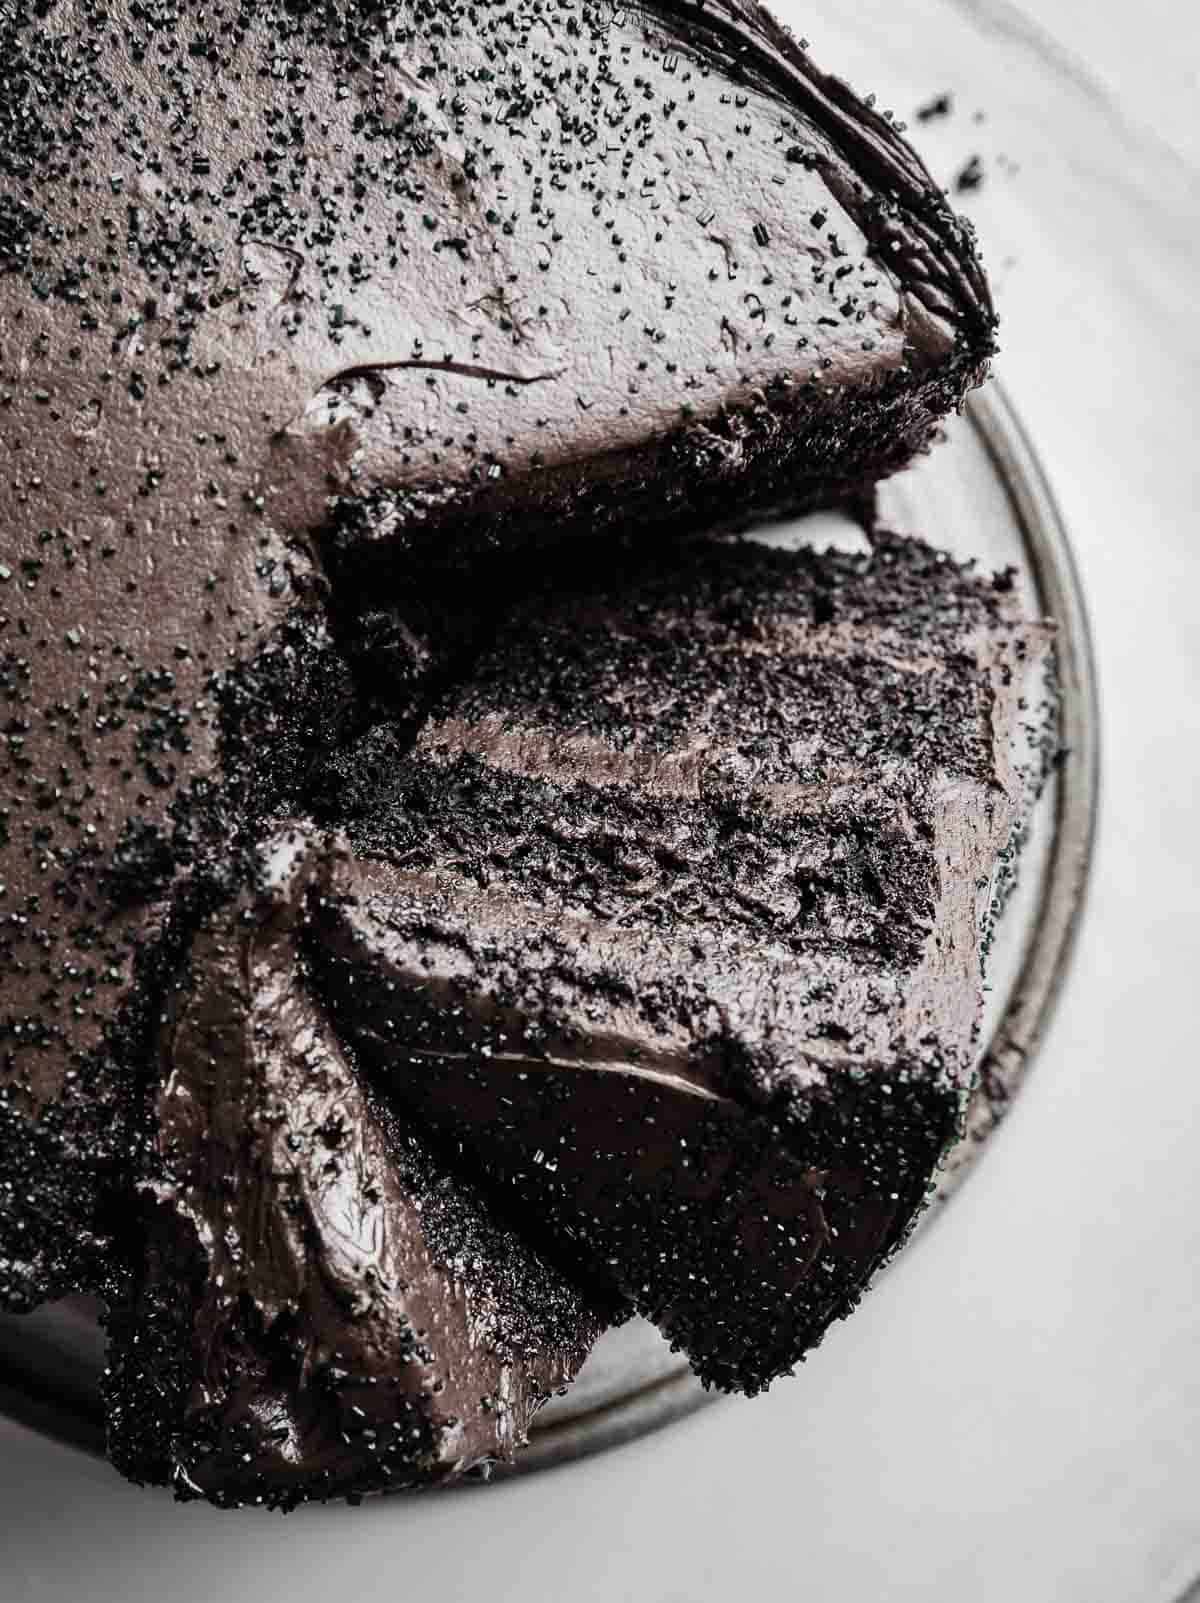 Three layered black velvet cake topped with black frosting, with two slices leaning against each other on a white background.